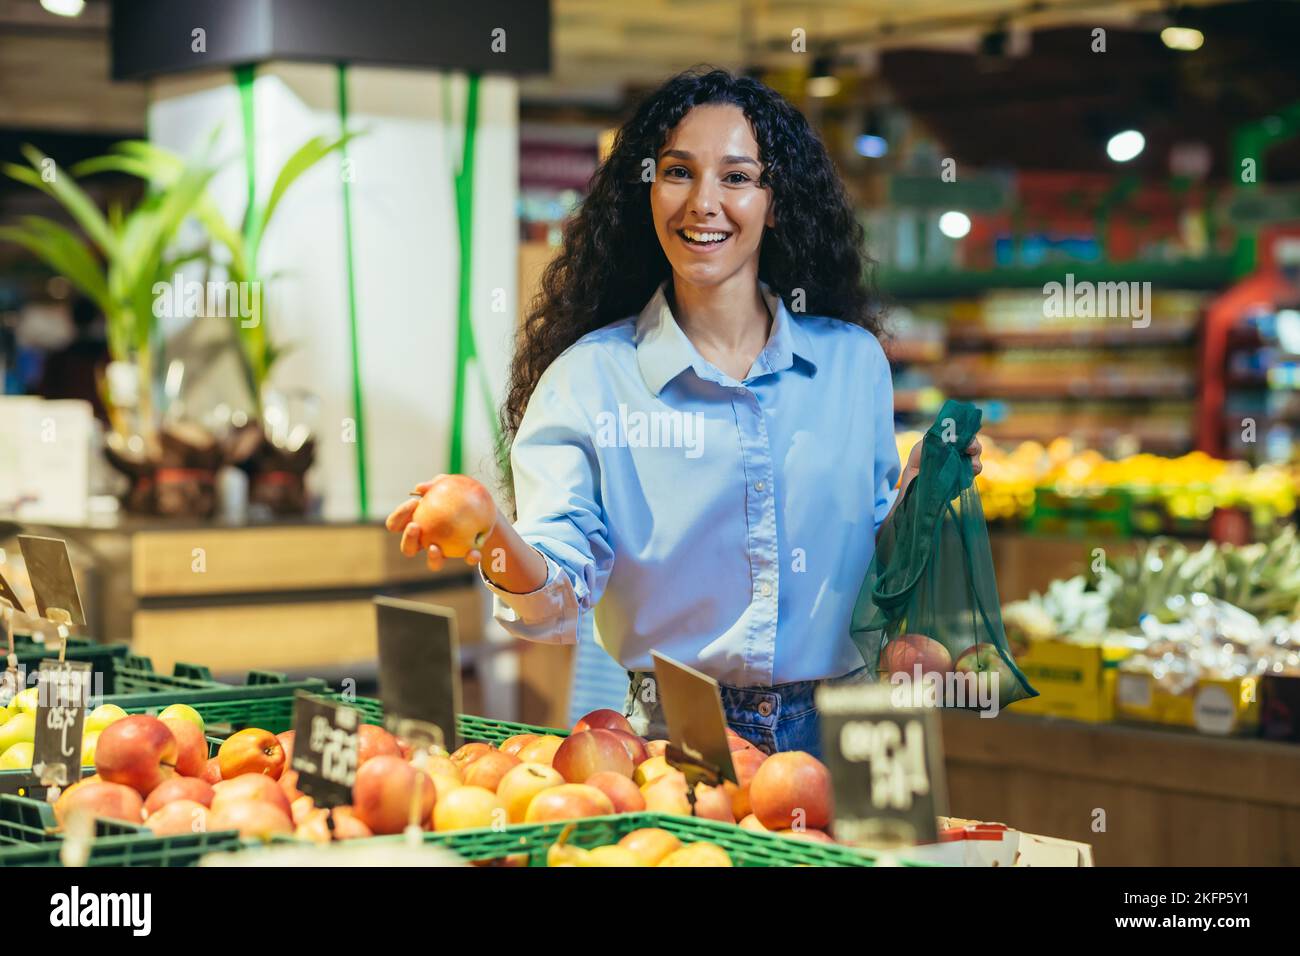 Portrait of happy woman shopper in supermarket, Hispanic woman chooses apples and fruits smiling and looking at camera, with grocery basket chooses goods. Stock Photo